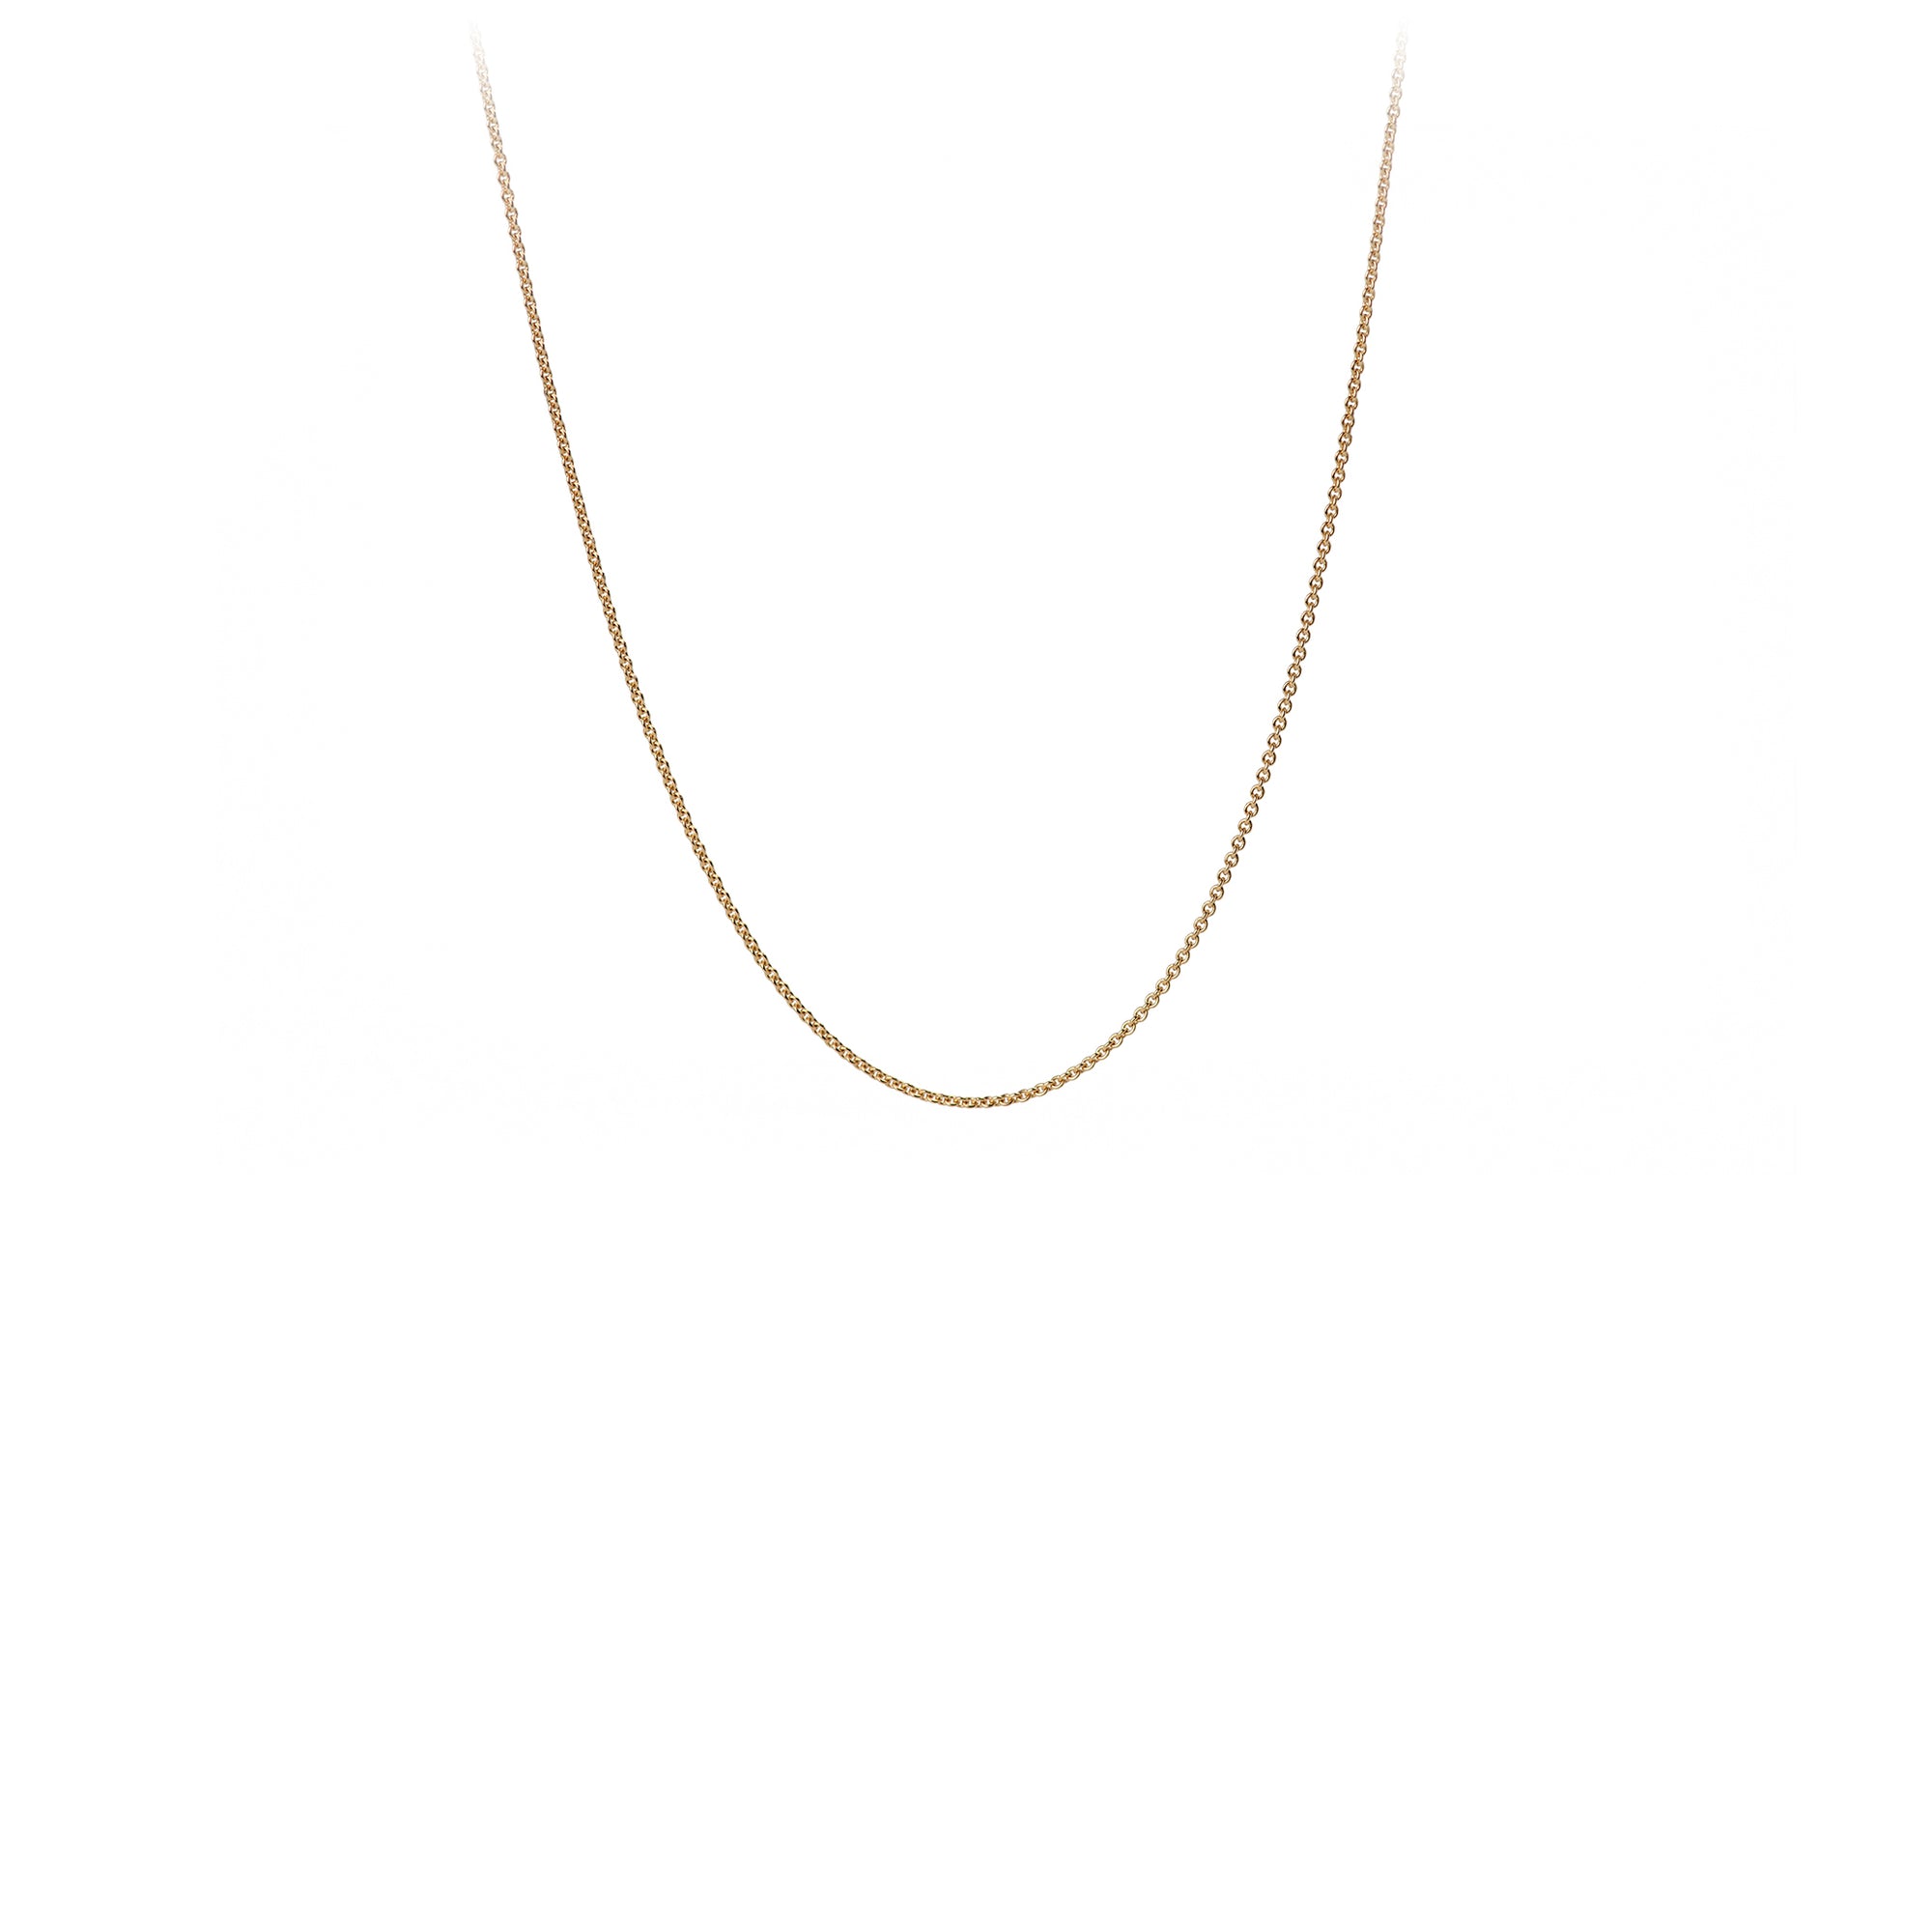 A 14 karat gold chain with fine cable links